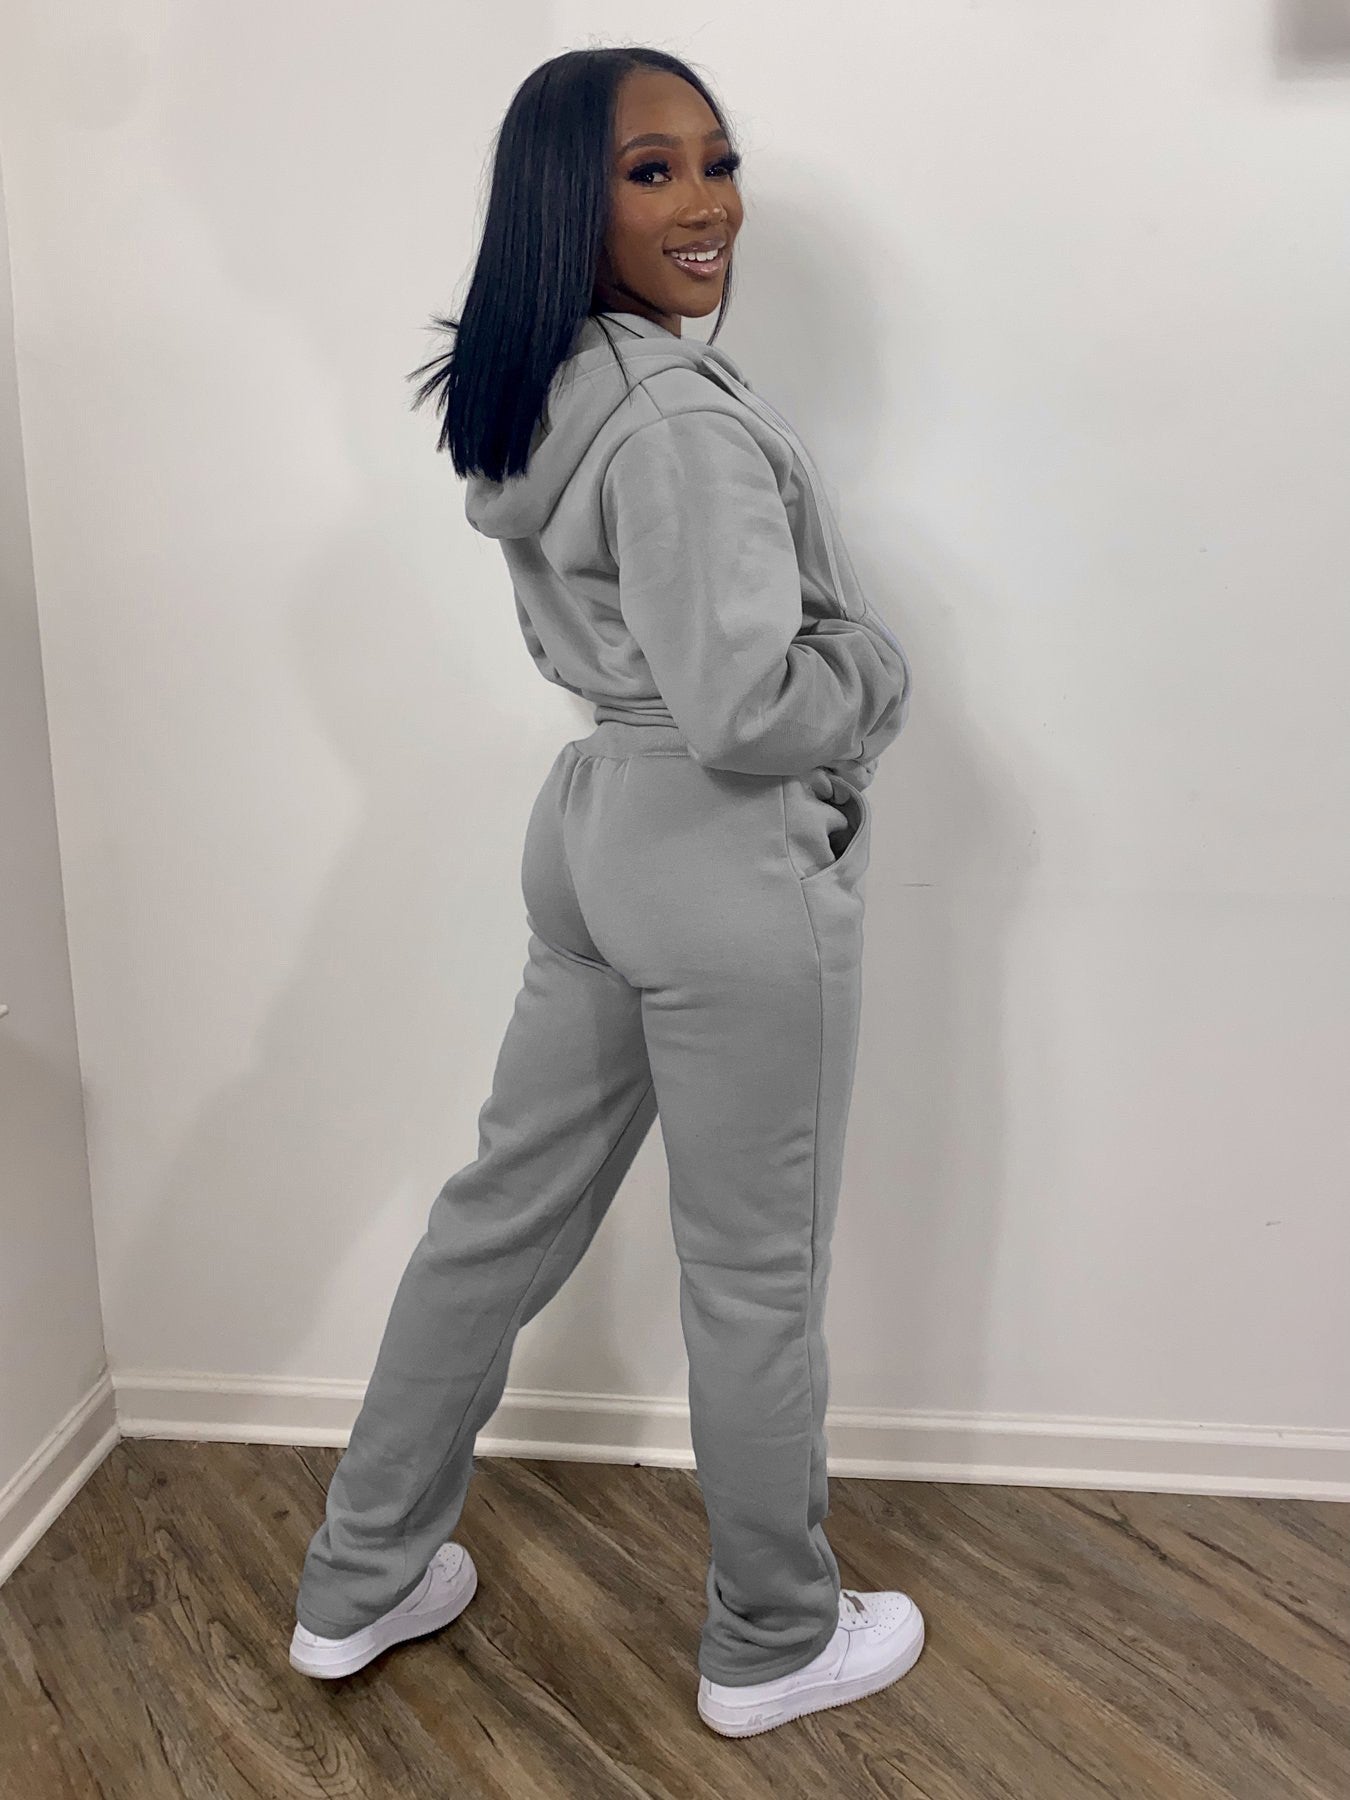 Women Sweatsuit Set 2 Piece Outfits Casual Hoodies Tops And Sweatpants Jogger Tracksuits Loose Trousers